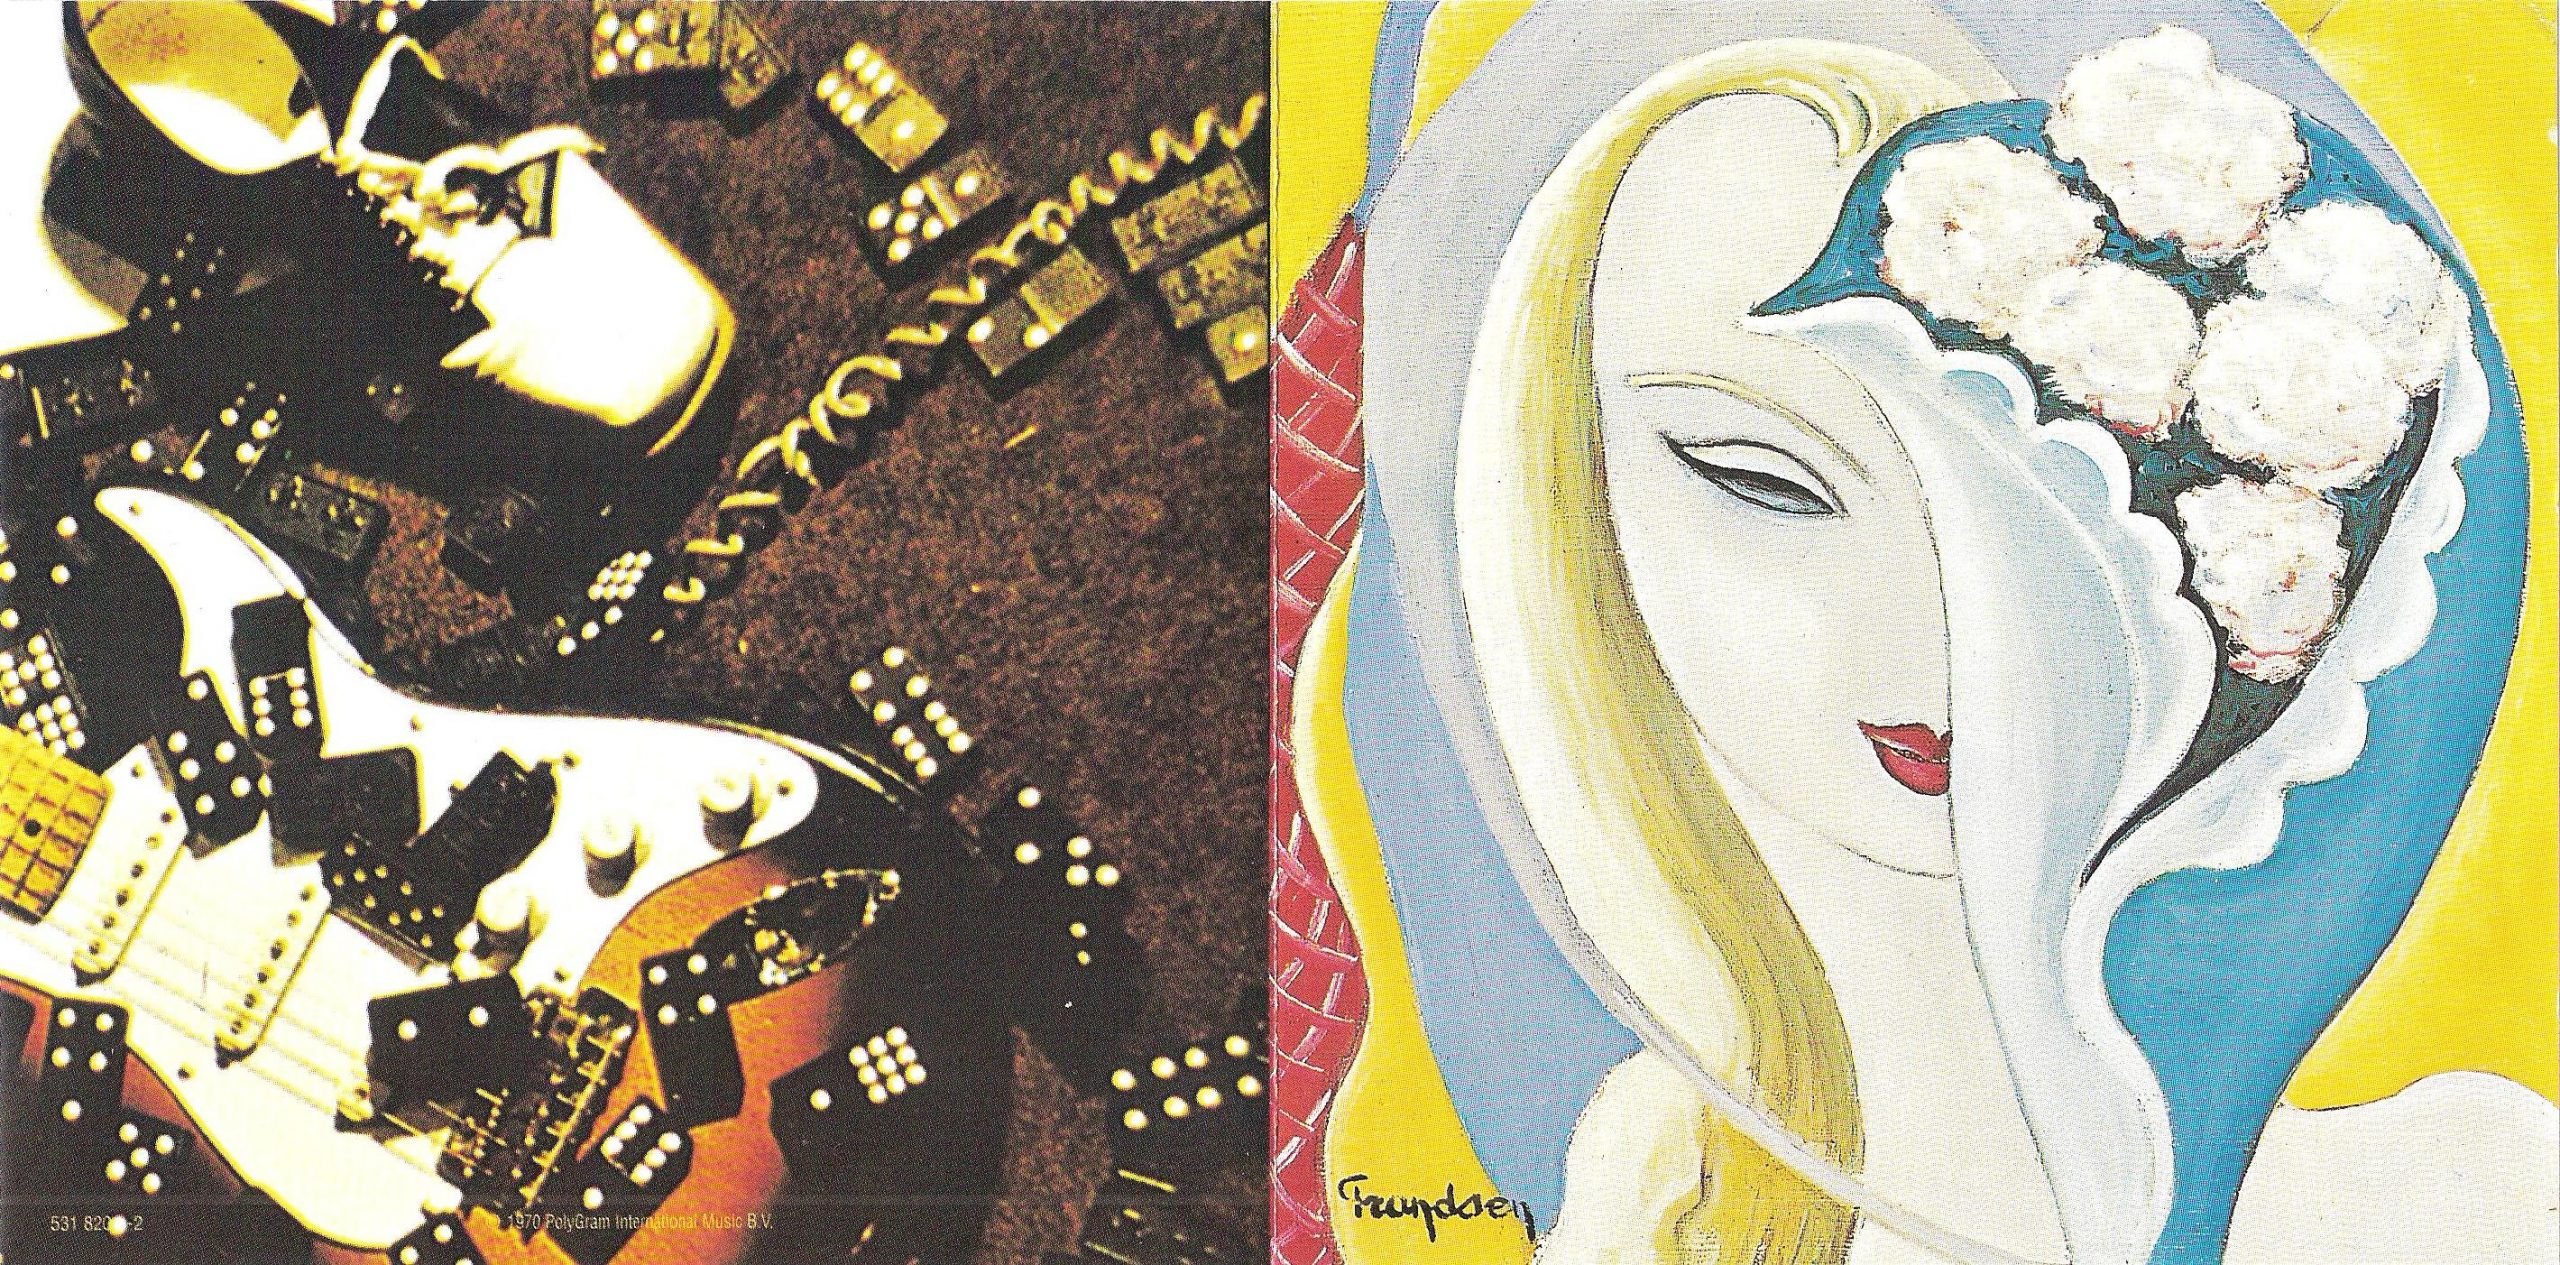 Derek & The Dominos: Layla And Other Assorted Love Songs